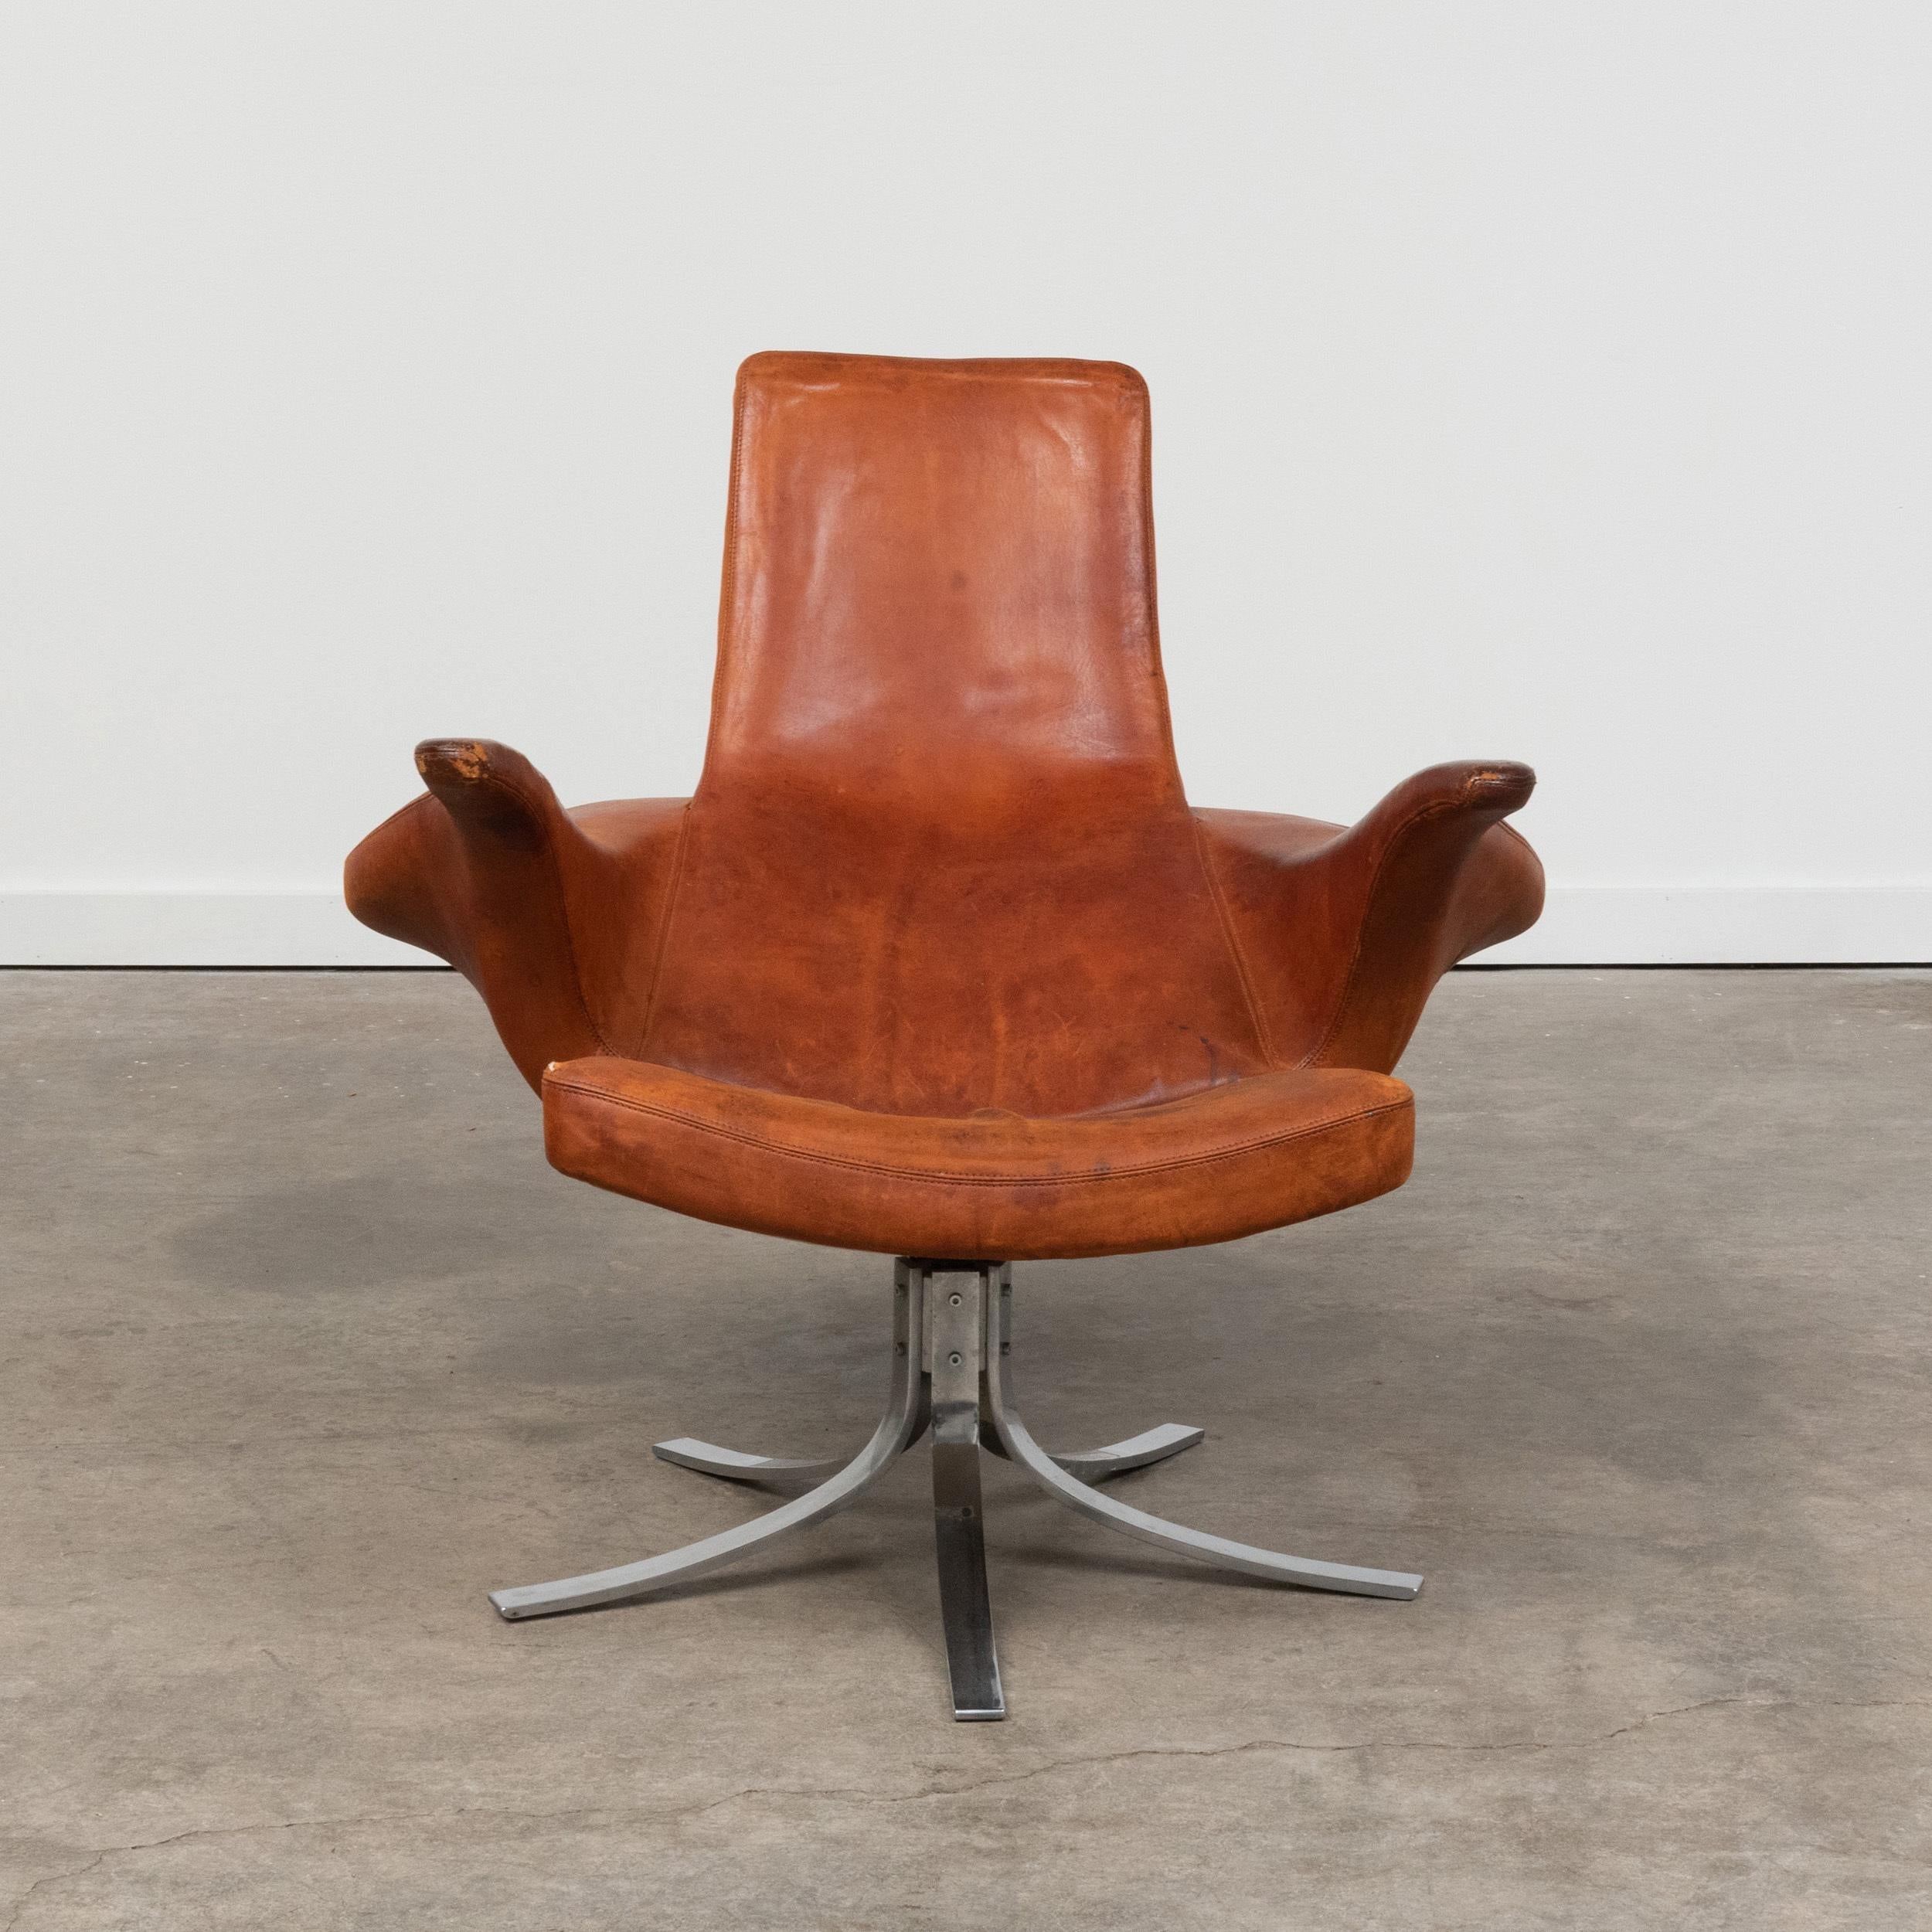 The 'Seagull' swivel chair by Gosta Berg and Stenerik Eriksson in chrome and cognac-colored leather for Fritz Hansen. This iconic chair was produced from 1968-1973 in small numbers and is a much sought-after design. The chair is early and has its